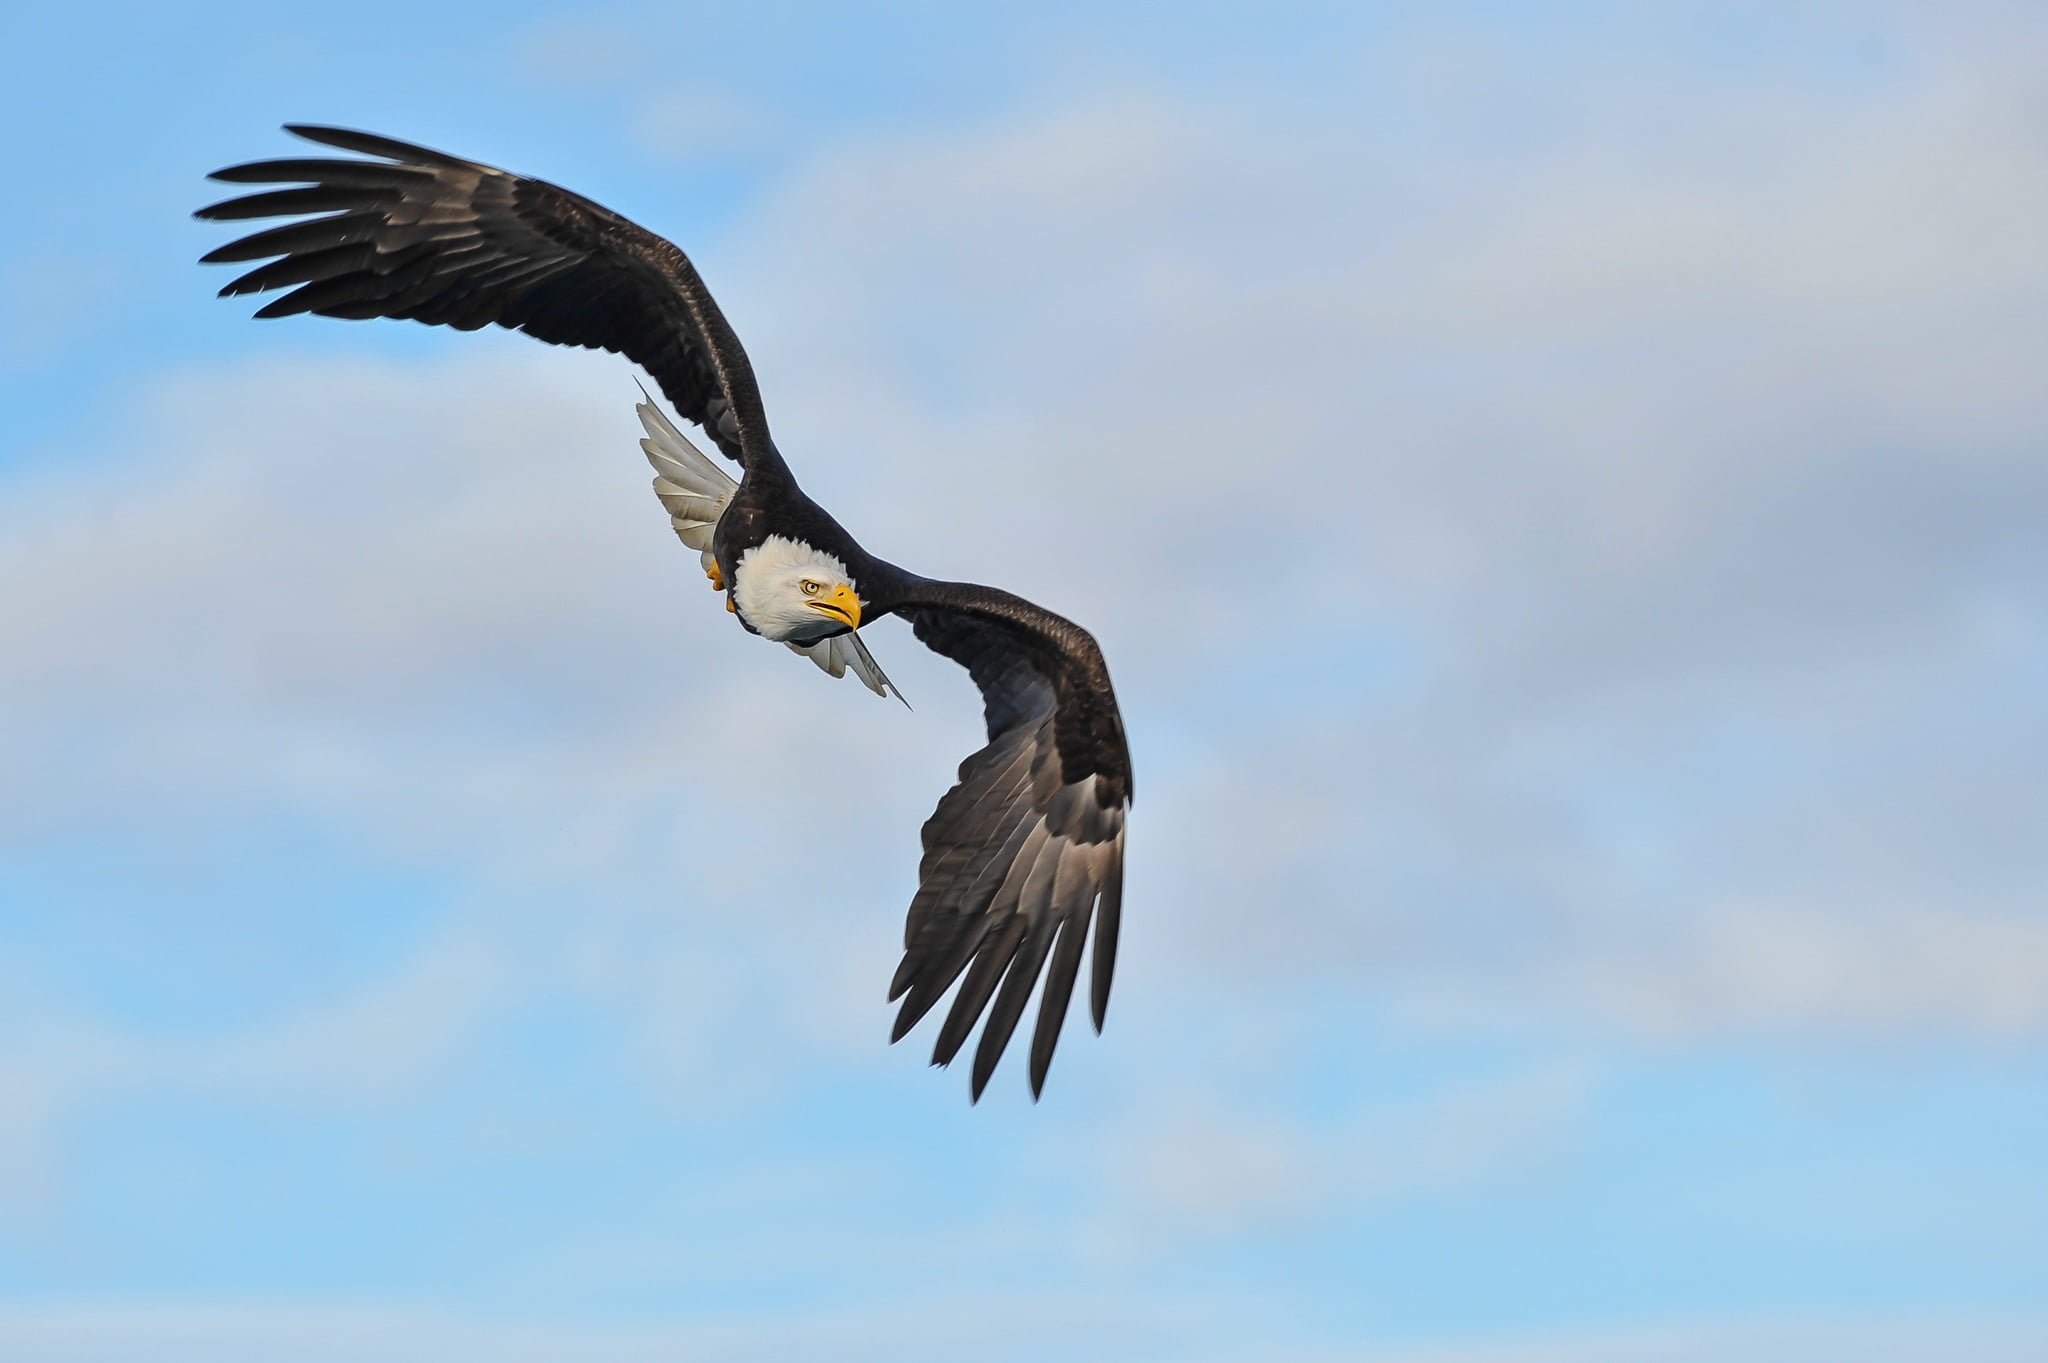 A Bald Eagle Soars Against The Alaskan Sky The Type Of Image That You Will Be Able To Capture During The Natureslens Bald Eagles & Otters Of Alaska Photography Holiday